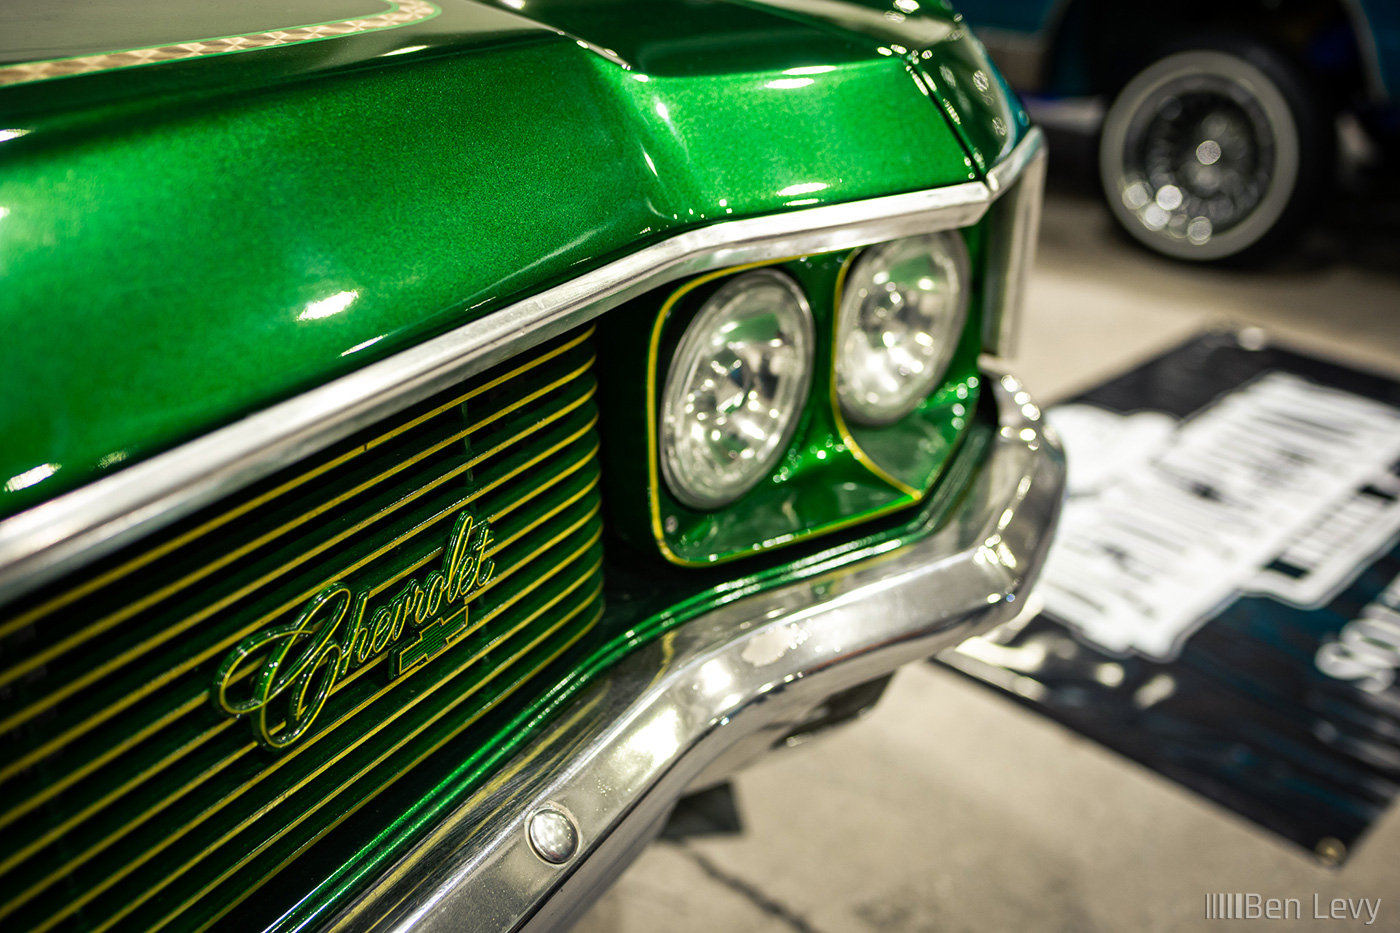 Chevrolet Badge on the Grill of a Green Caprice